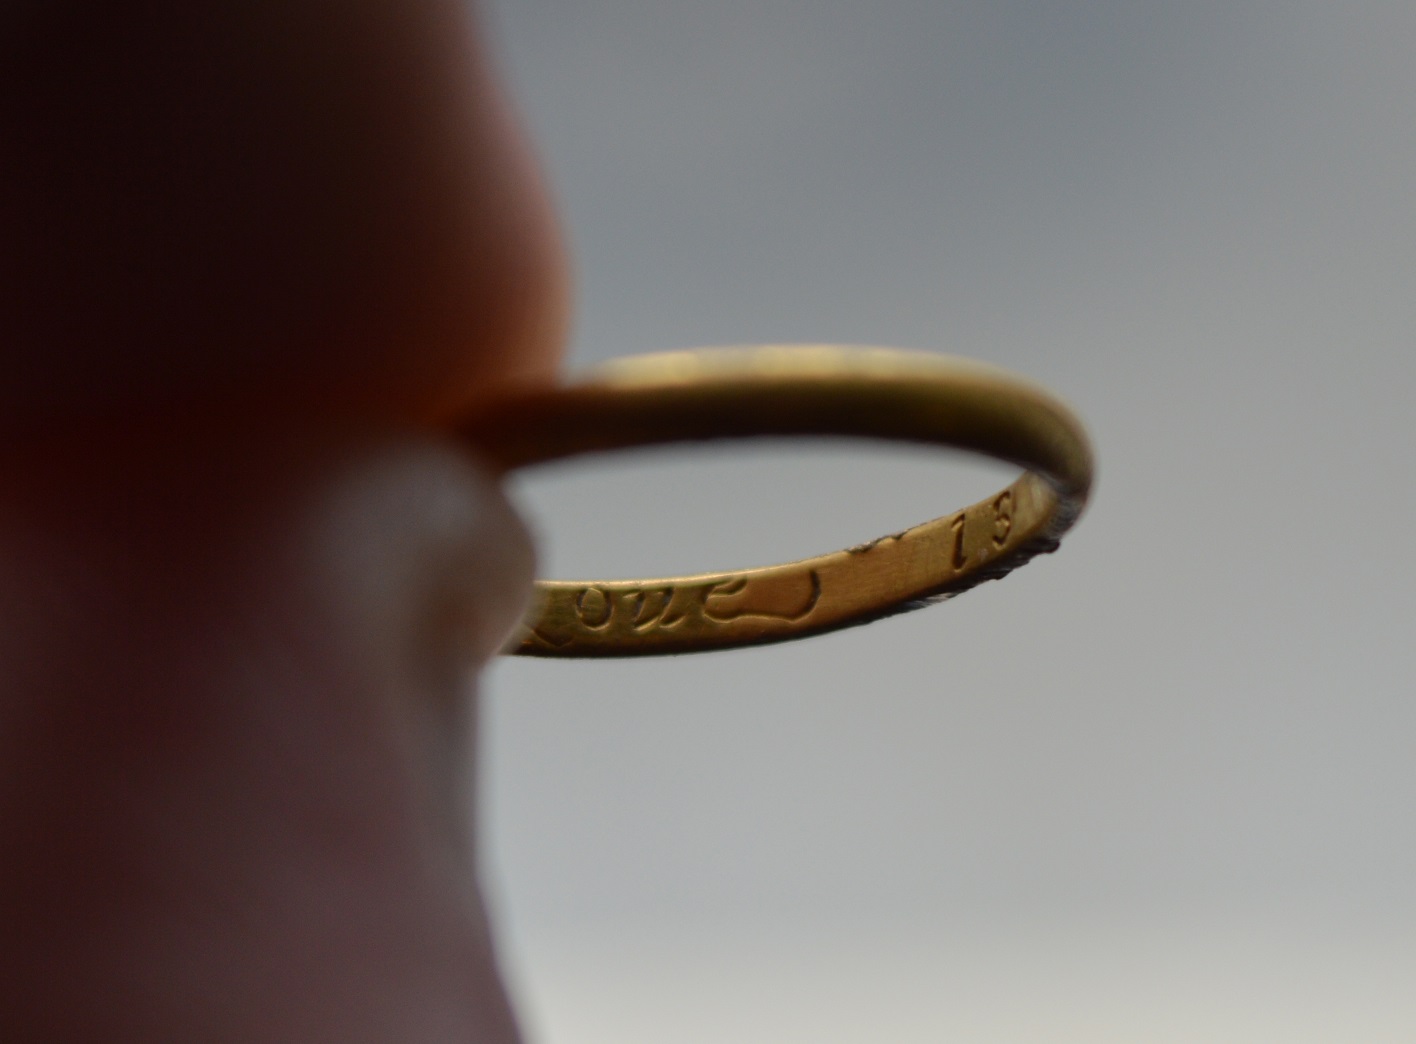 Gold posy ring with inscription 'Love is the caure' weight 1. - Image 4 of 4